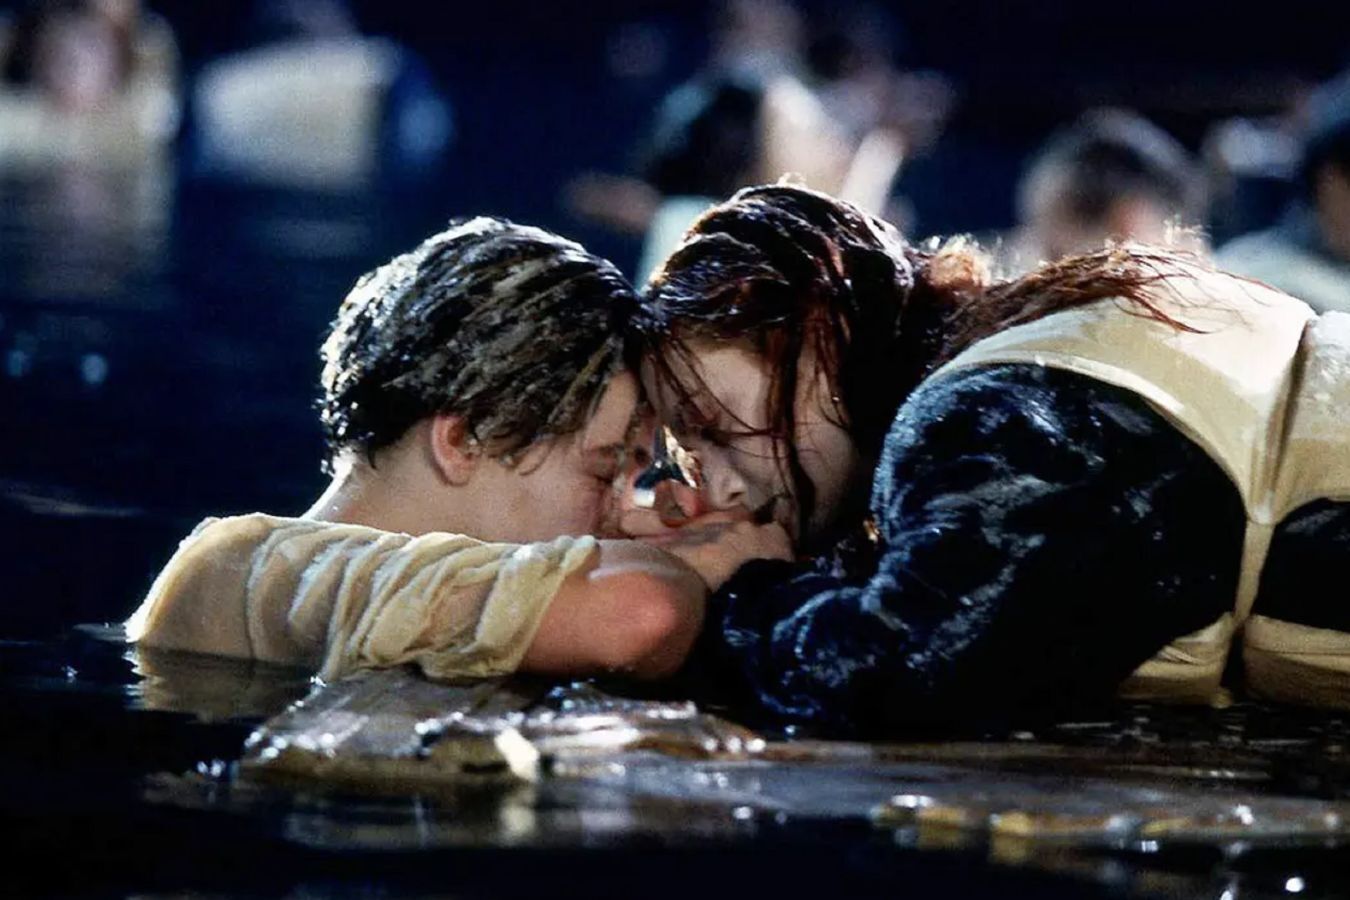 After Watching The Movie For The First Time. : R/titanic